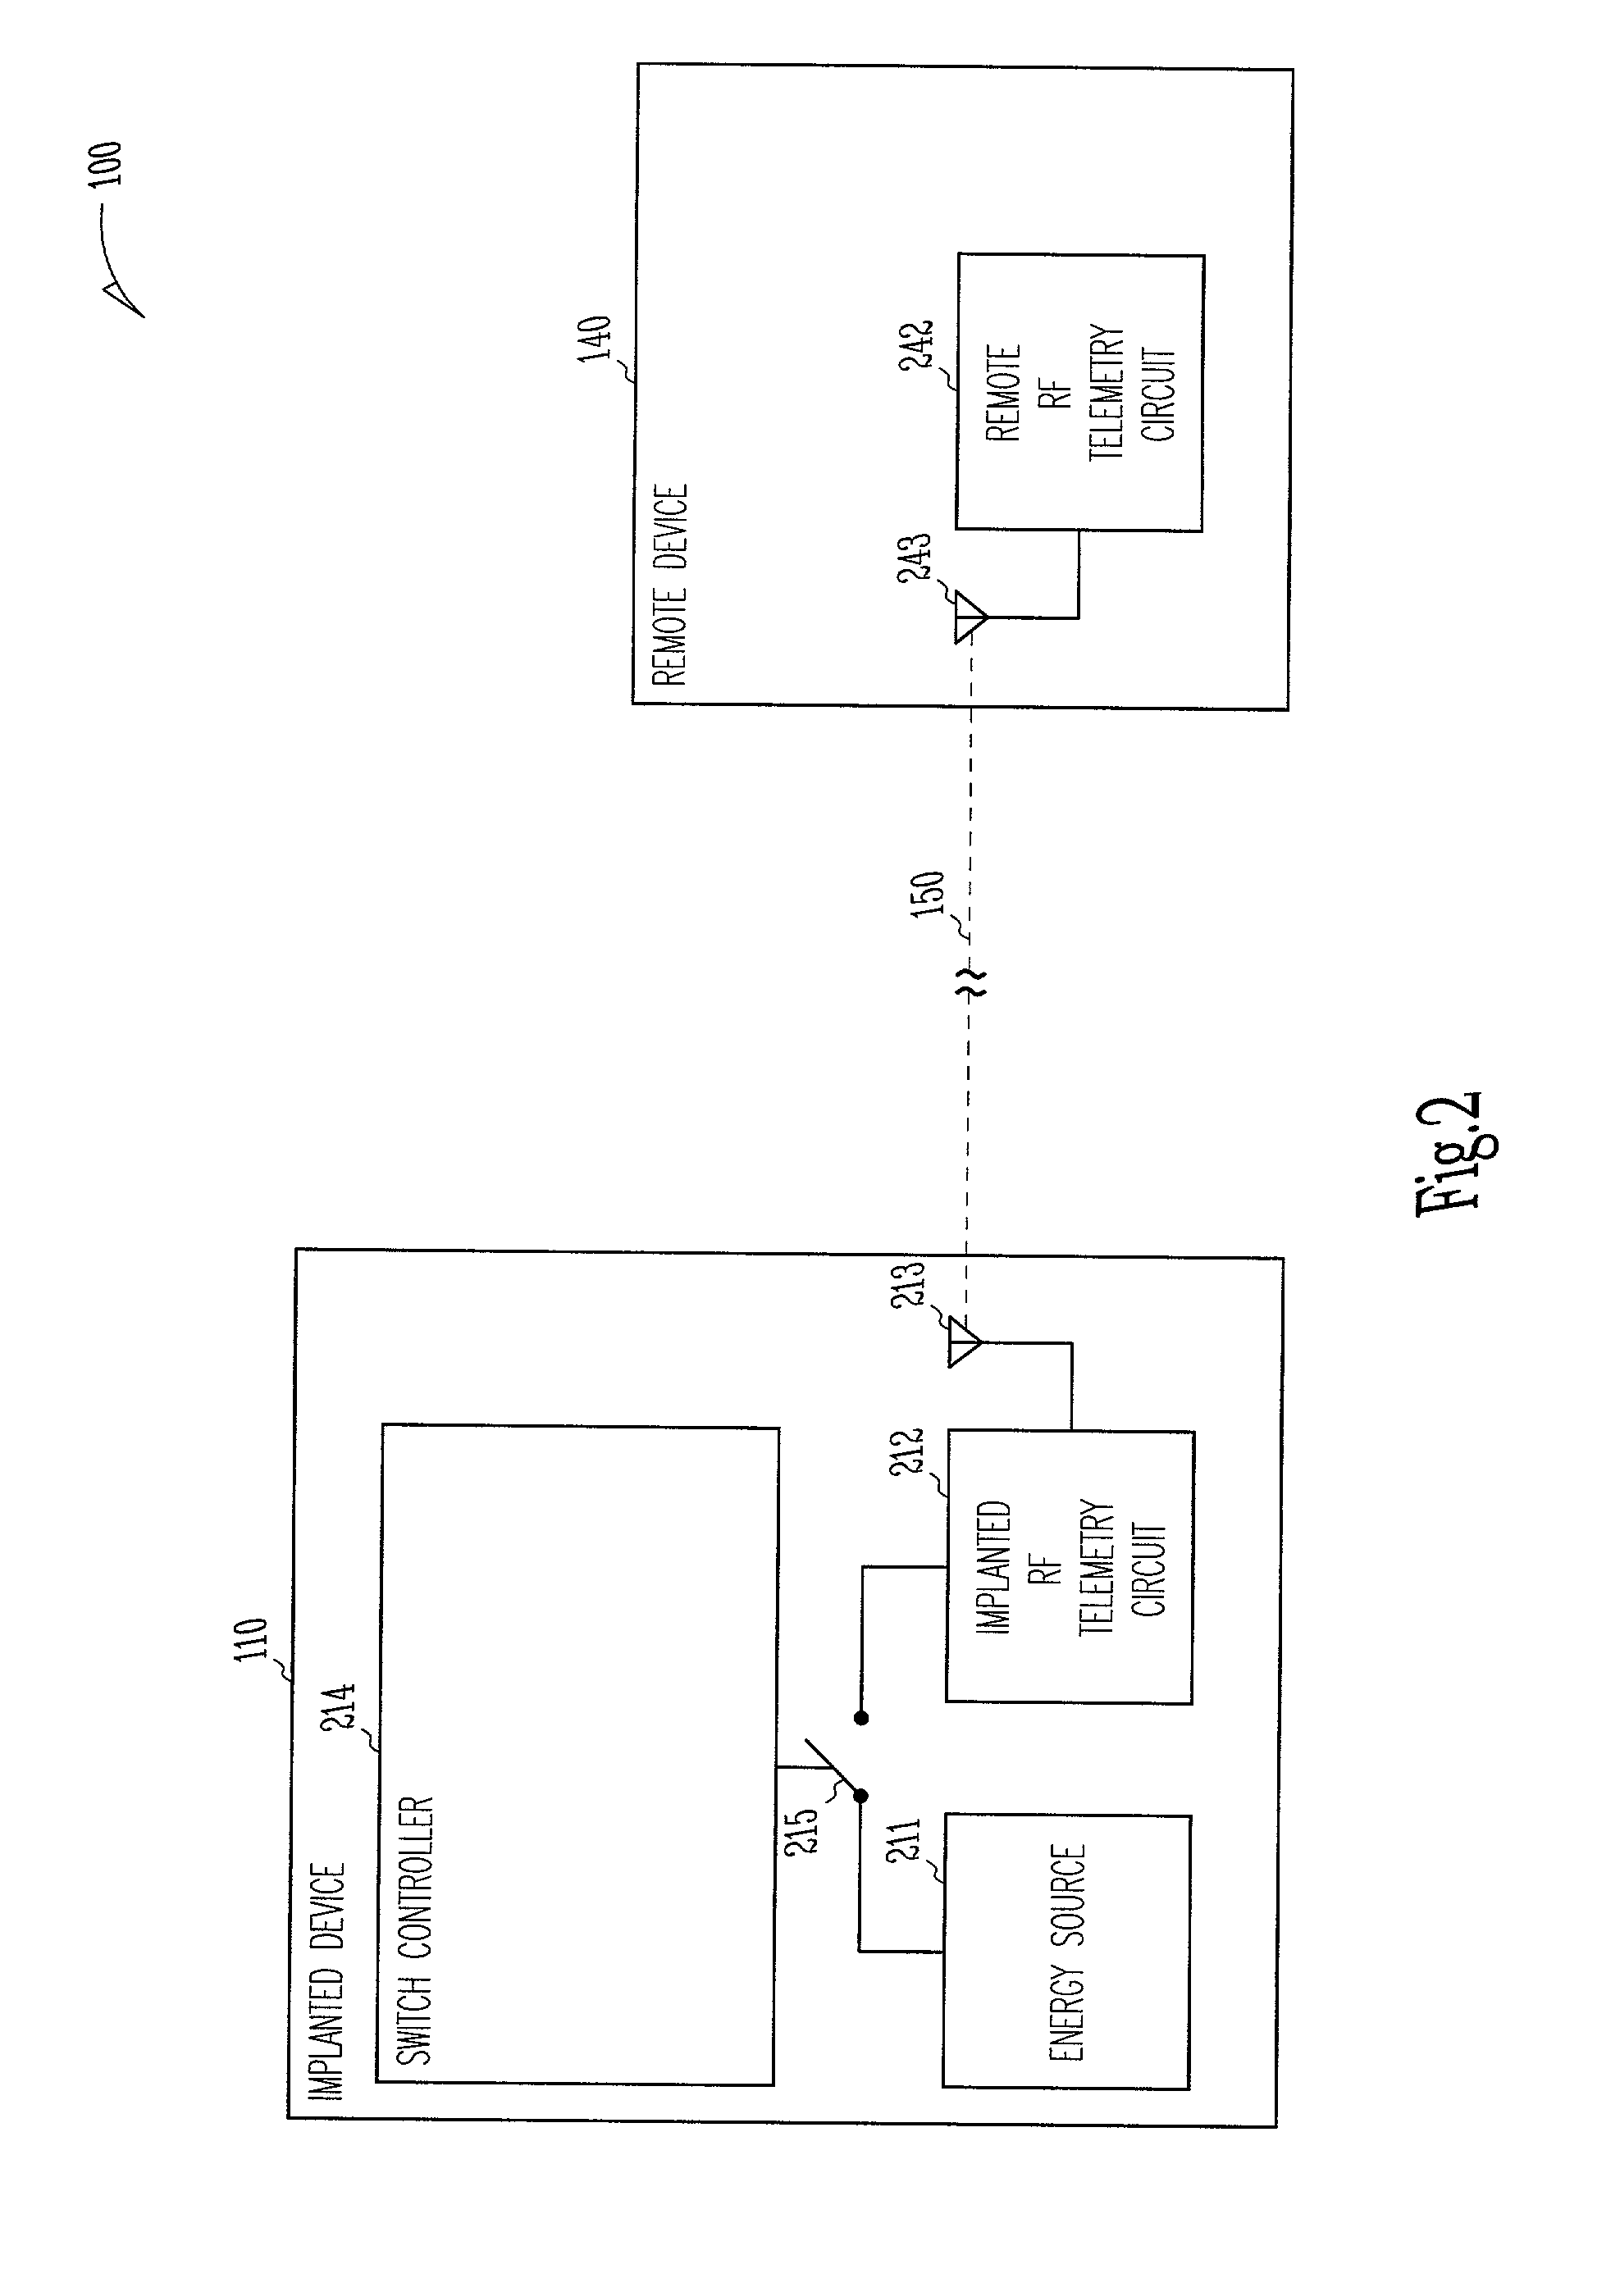 Methods and apparatuses for implantable medical device telemetry power management